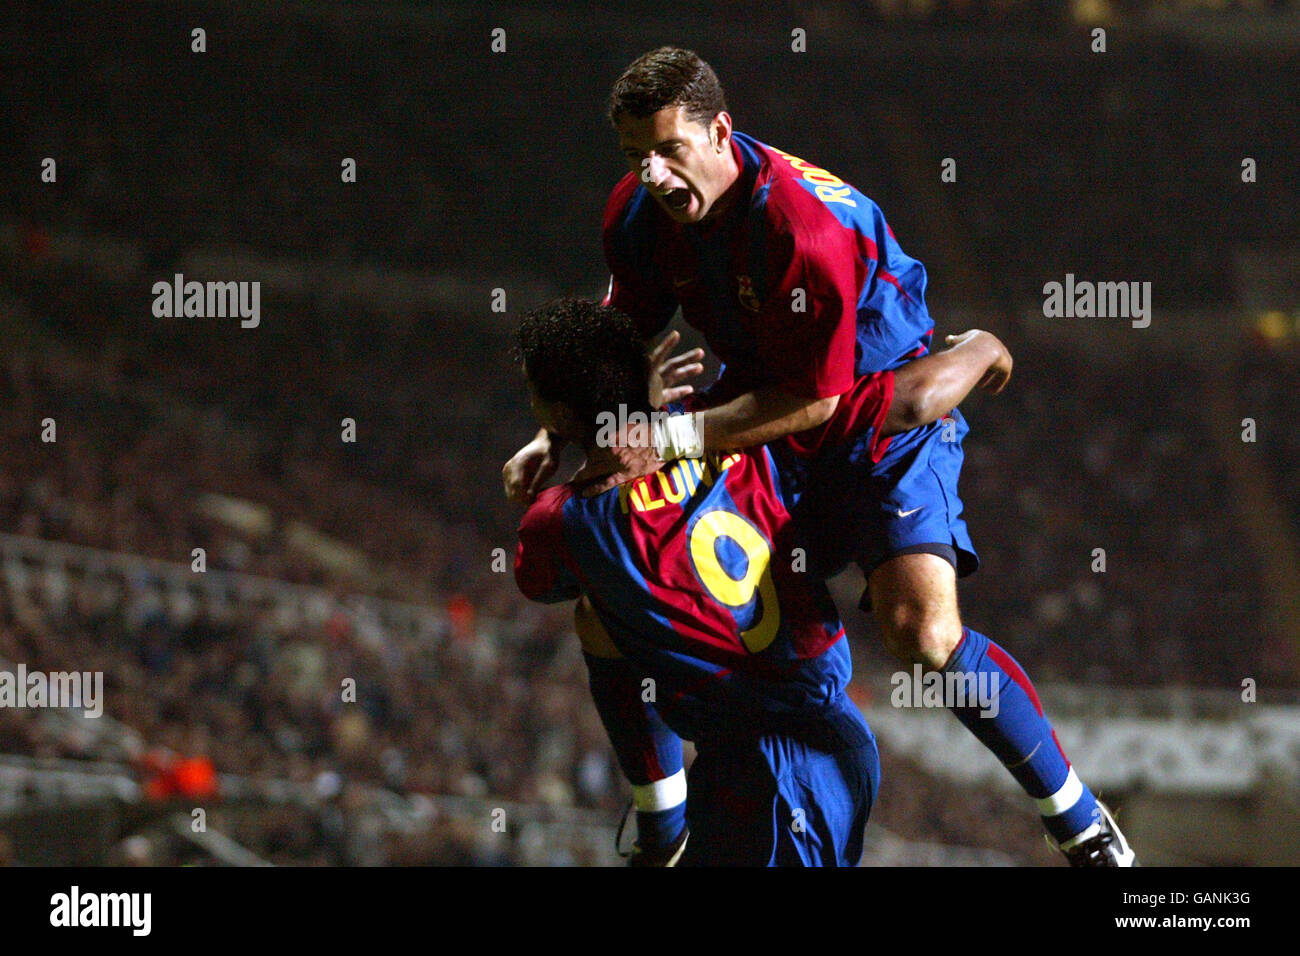 Soccer - UEFA Champions League - Group A - Newcastle United v Barcelona. Barcelona's Patrick Kluivert celebrates scoring the opening goal against Newcastle United with teammate Fabio Rochemback (top) Stock Photo